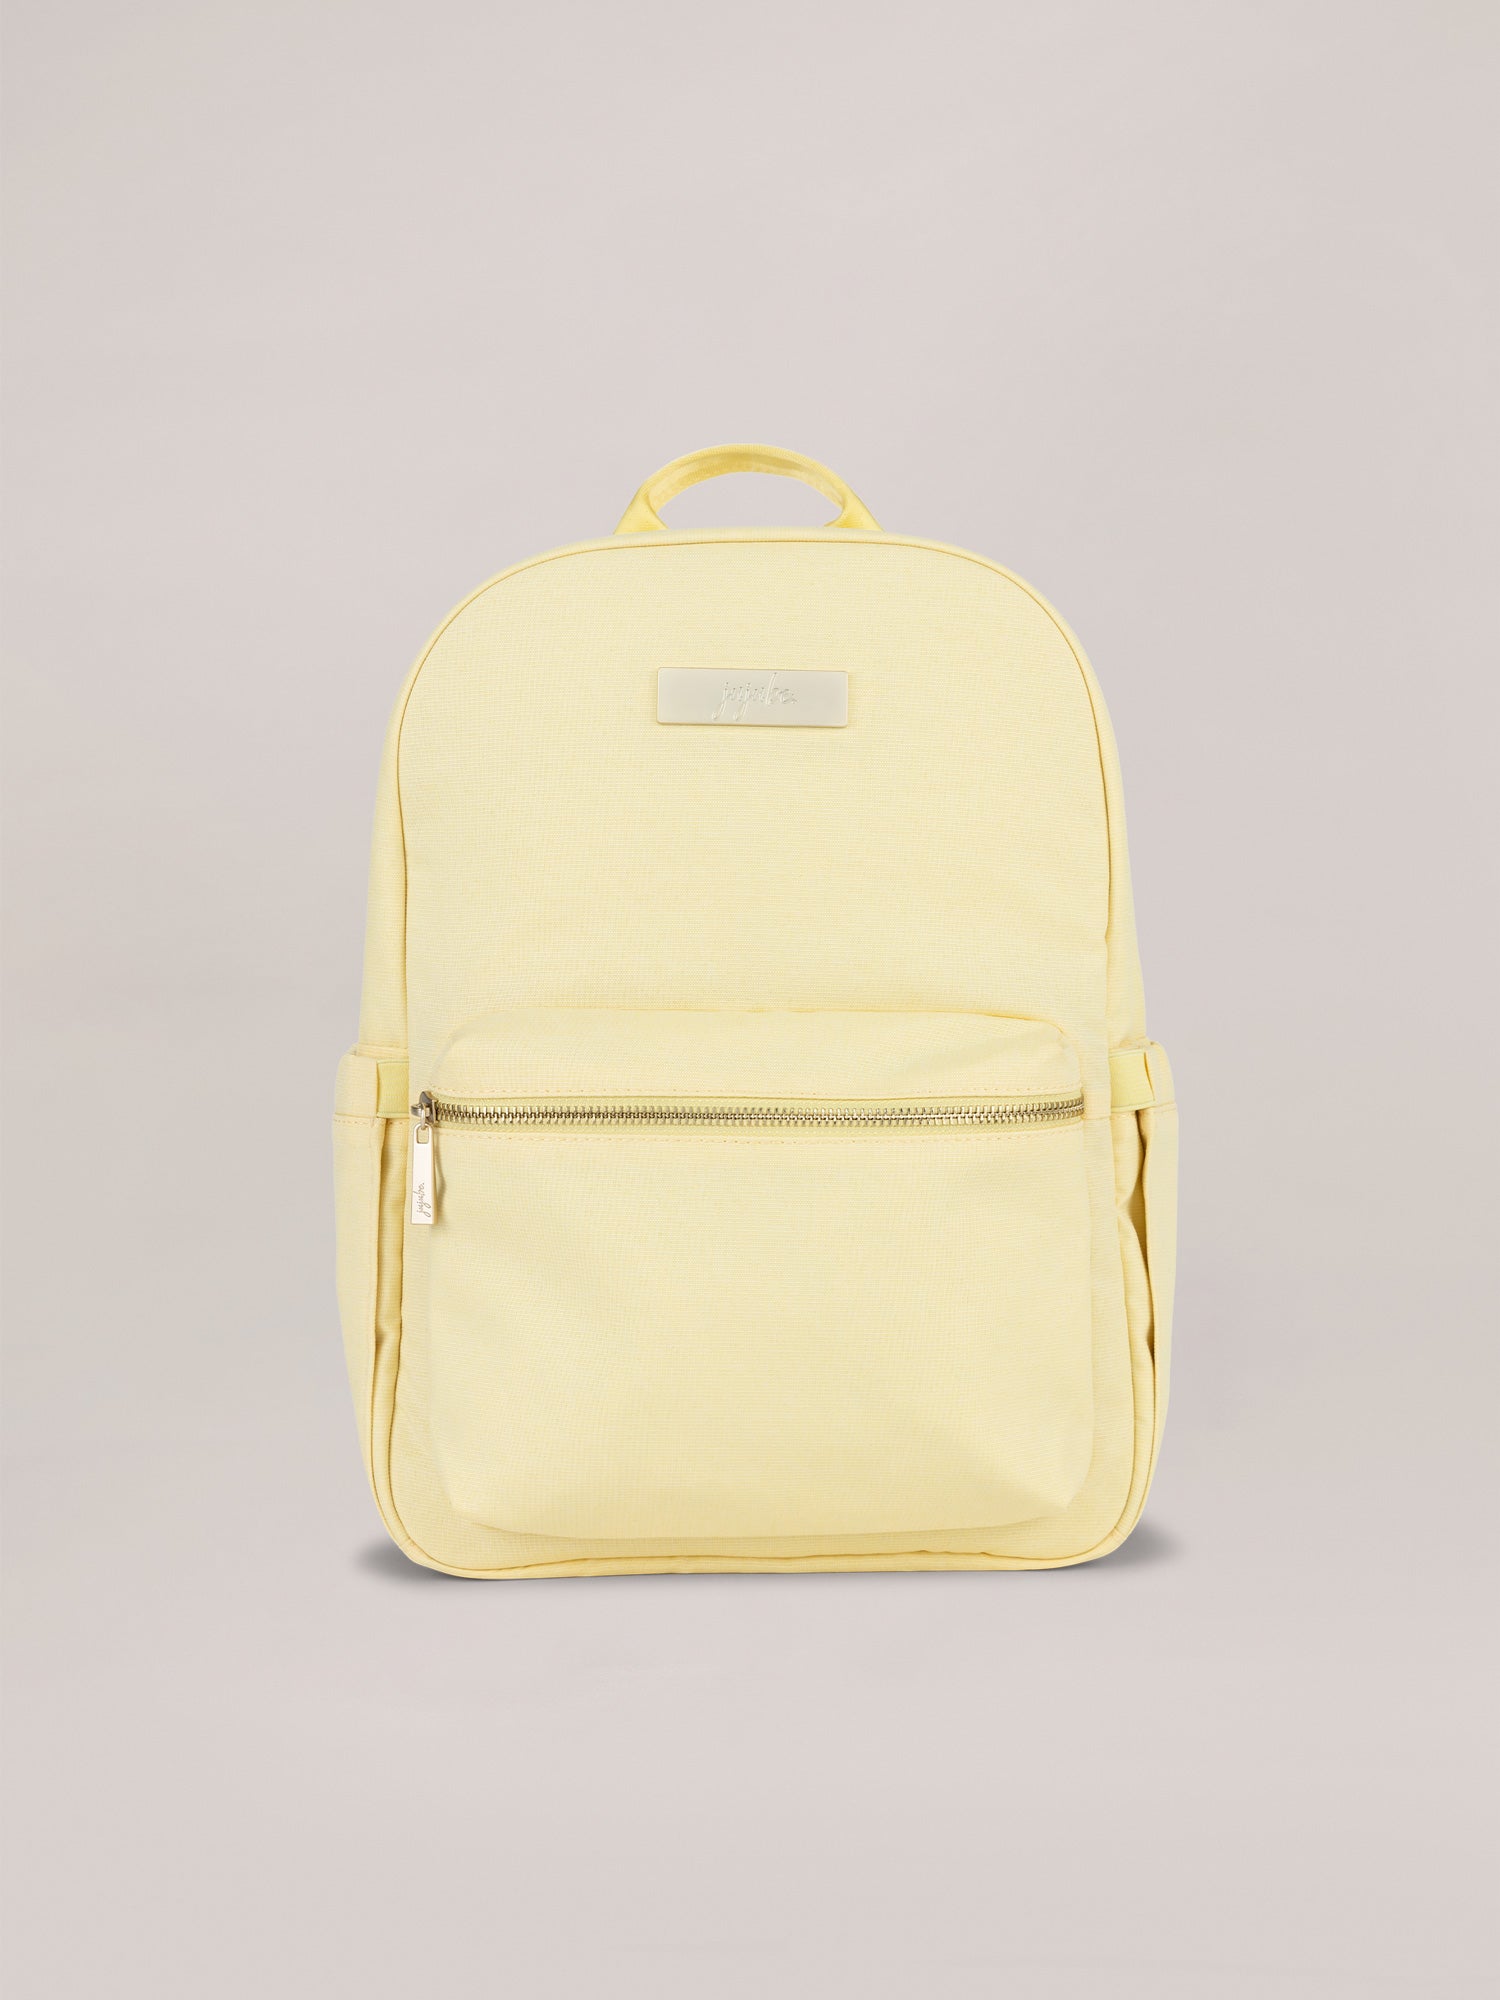 Light Yellow Midi Backpack Front View